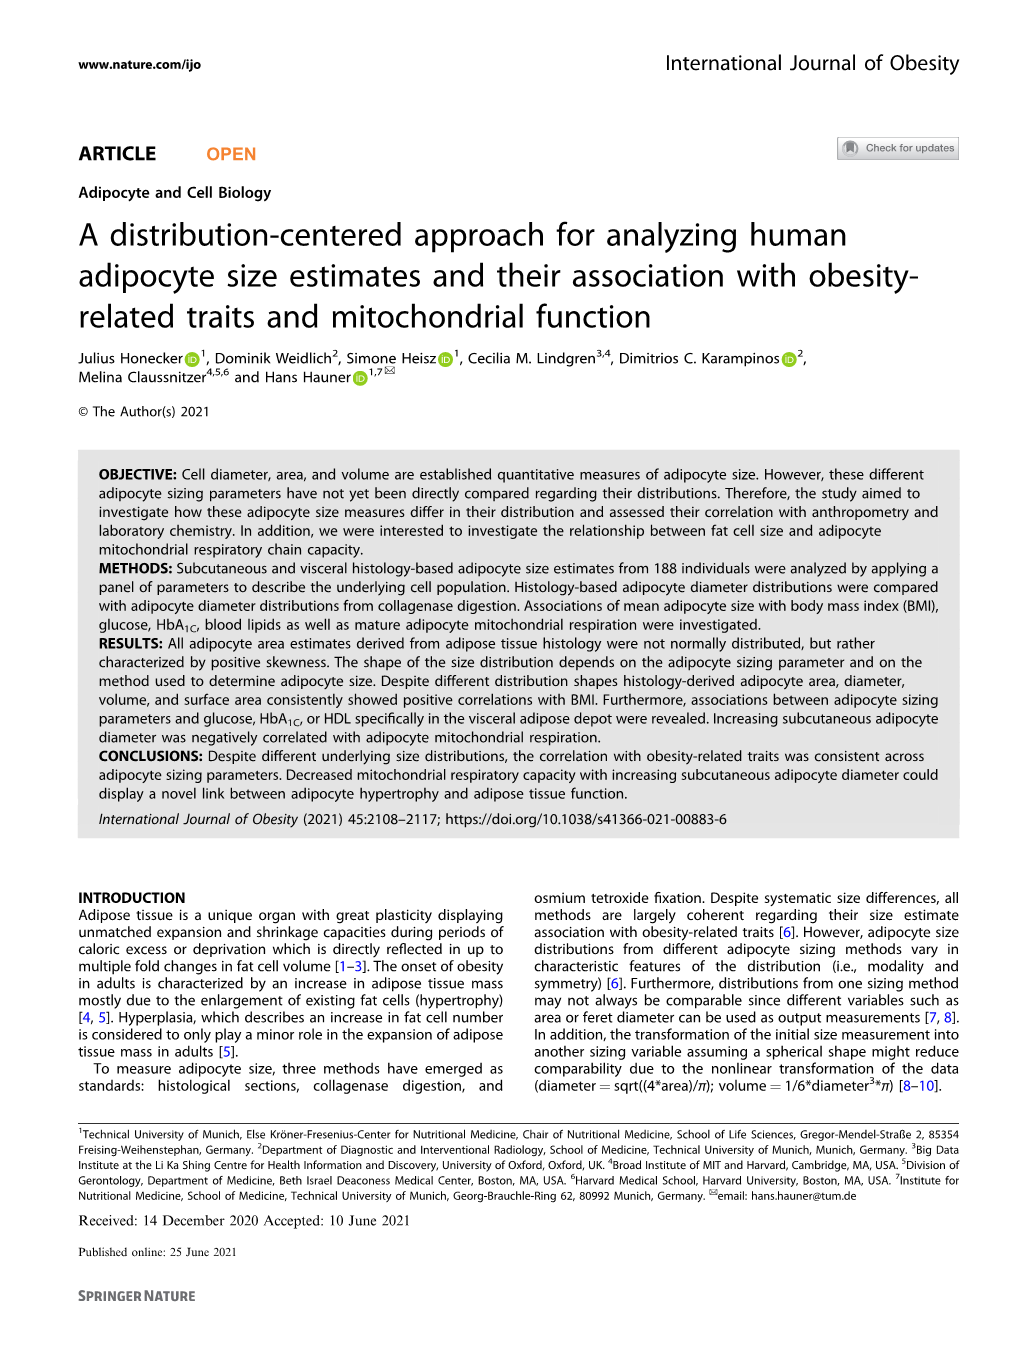 A Distribution-Centered Approach for Analyzing Human Adipocyte Size Estimates and Their Association with Obesity-Related Traits